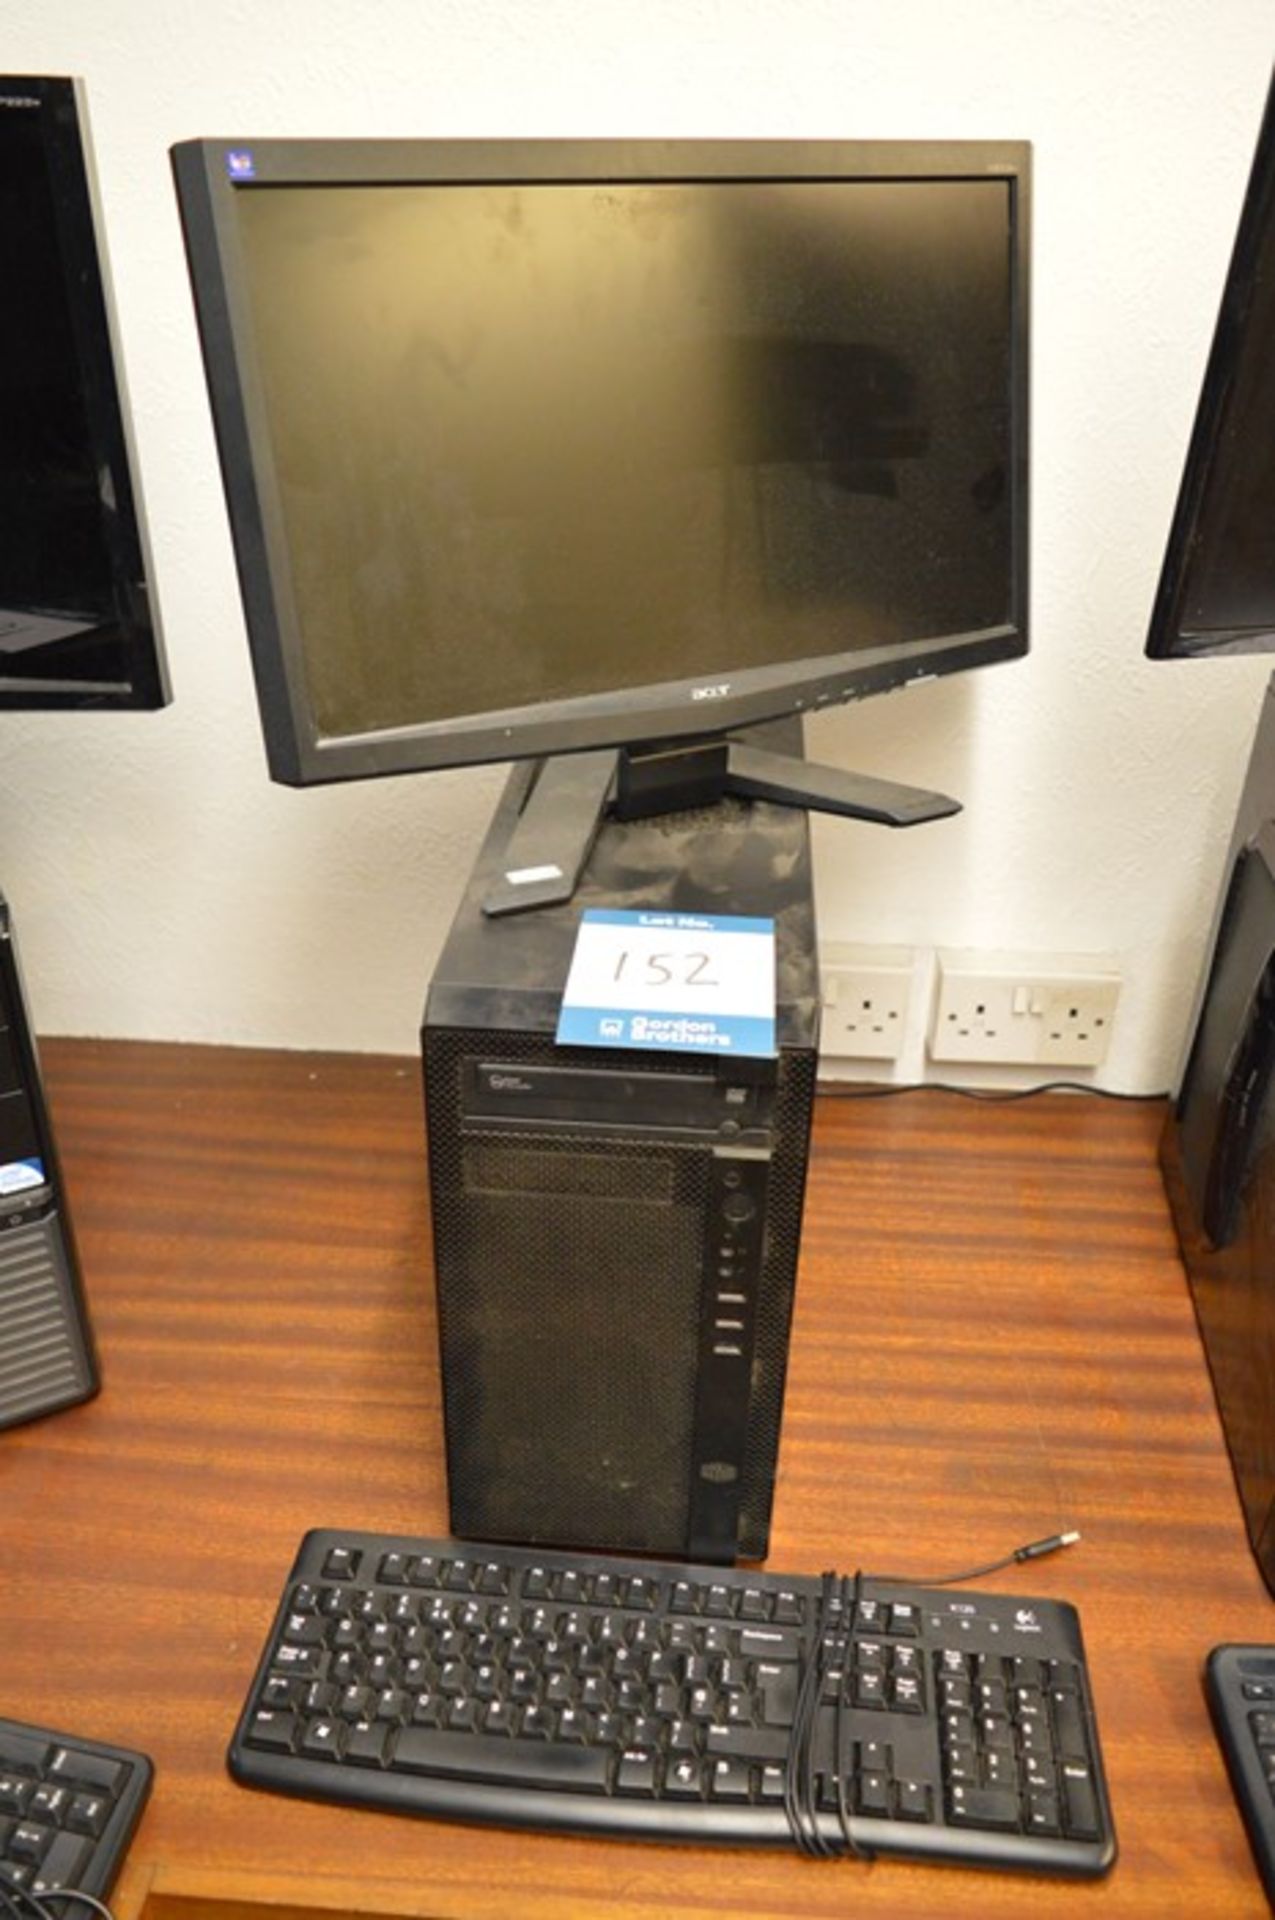 Clone PC with Acer monitor